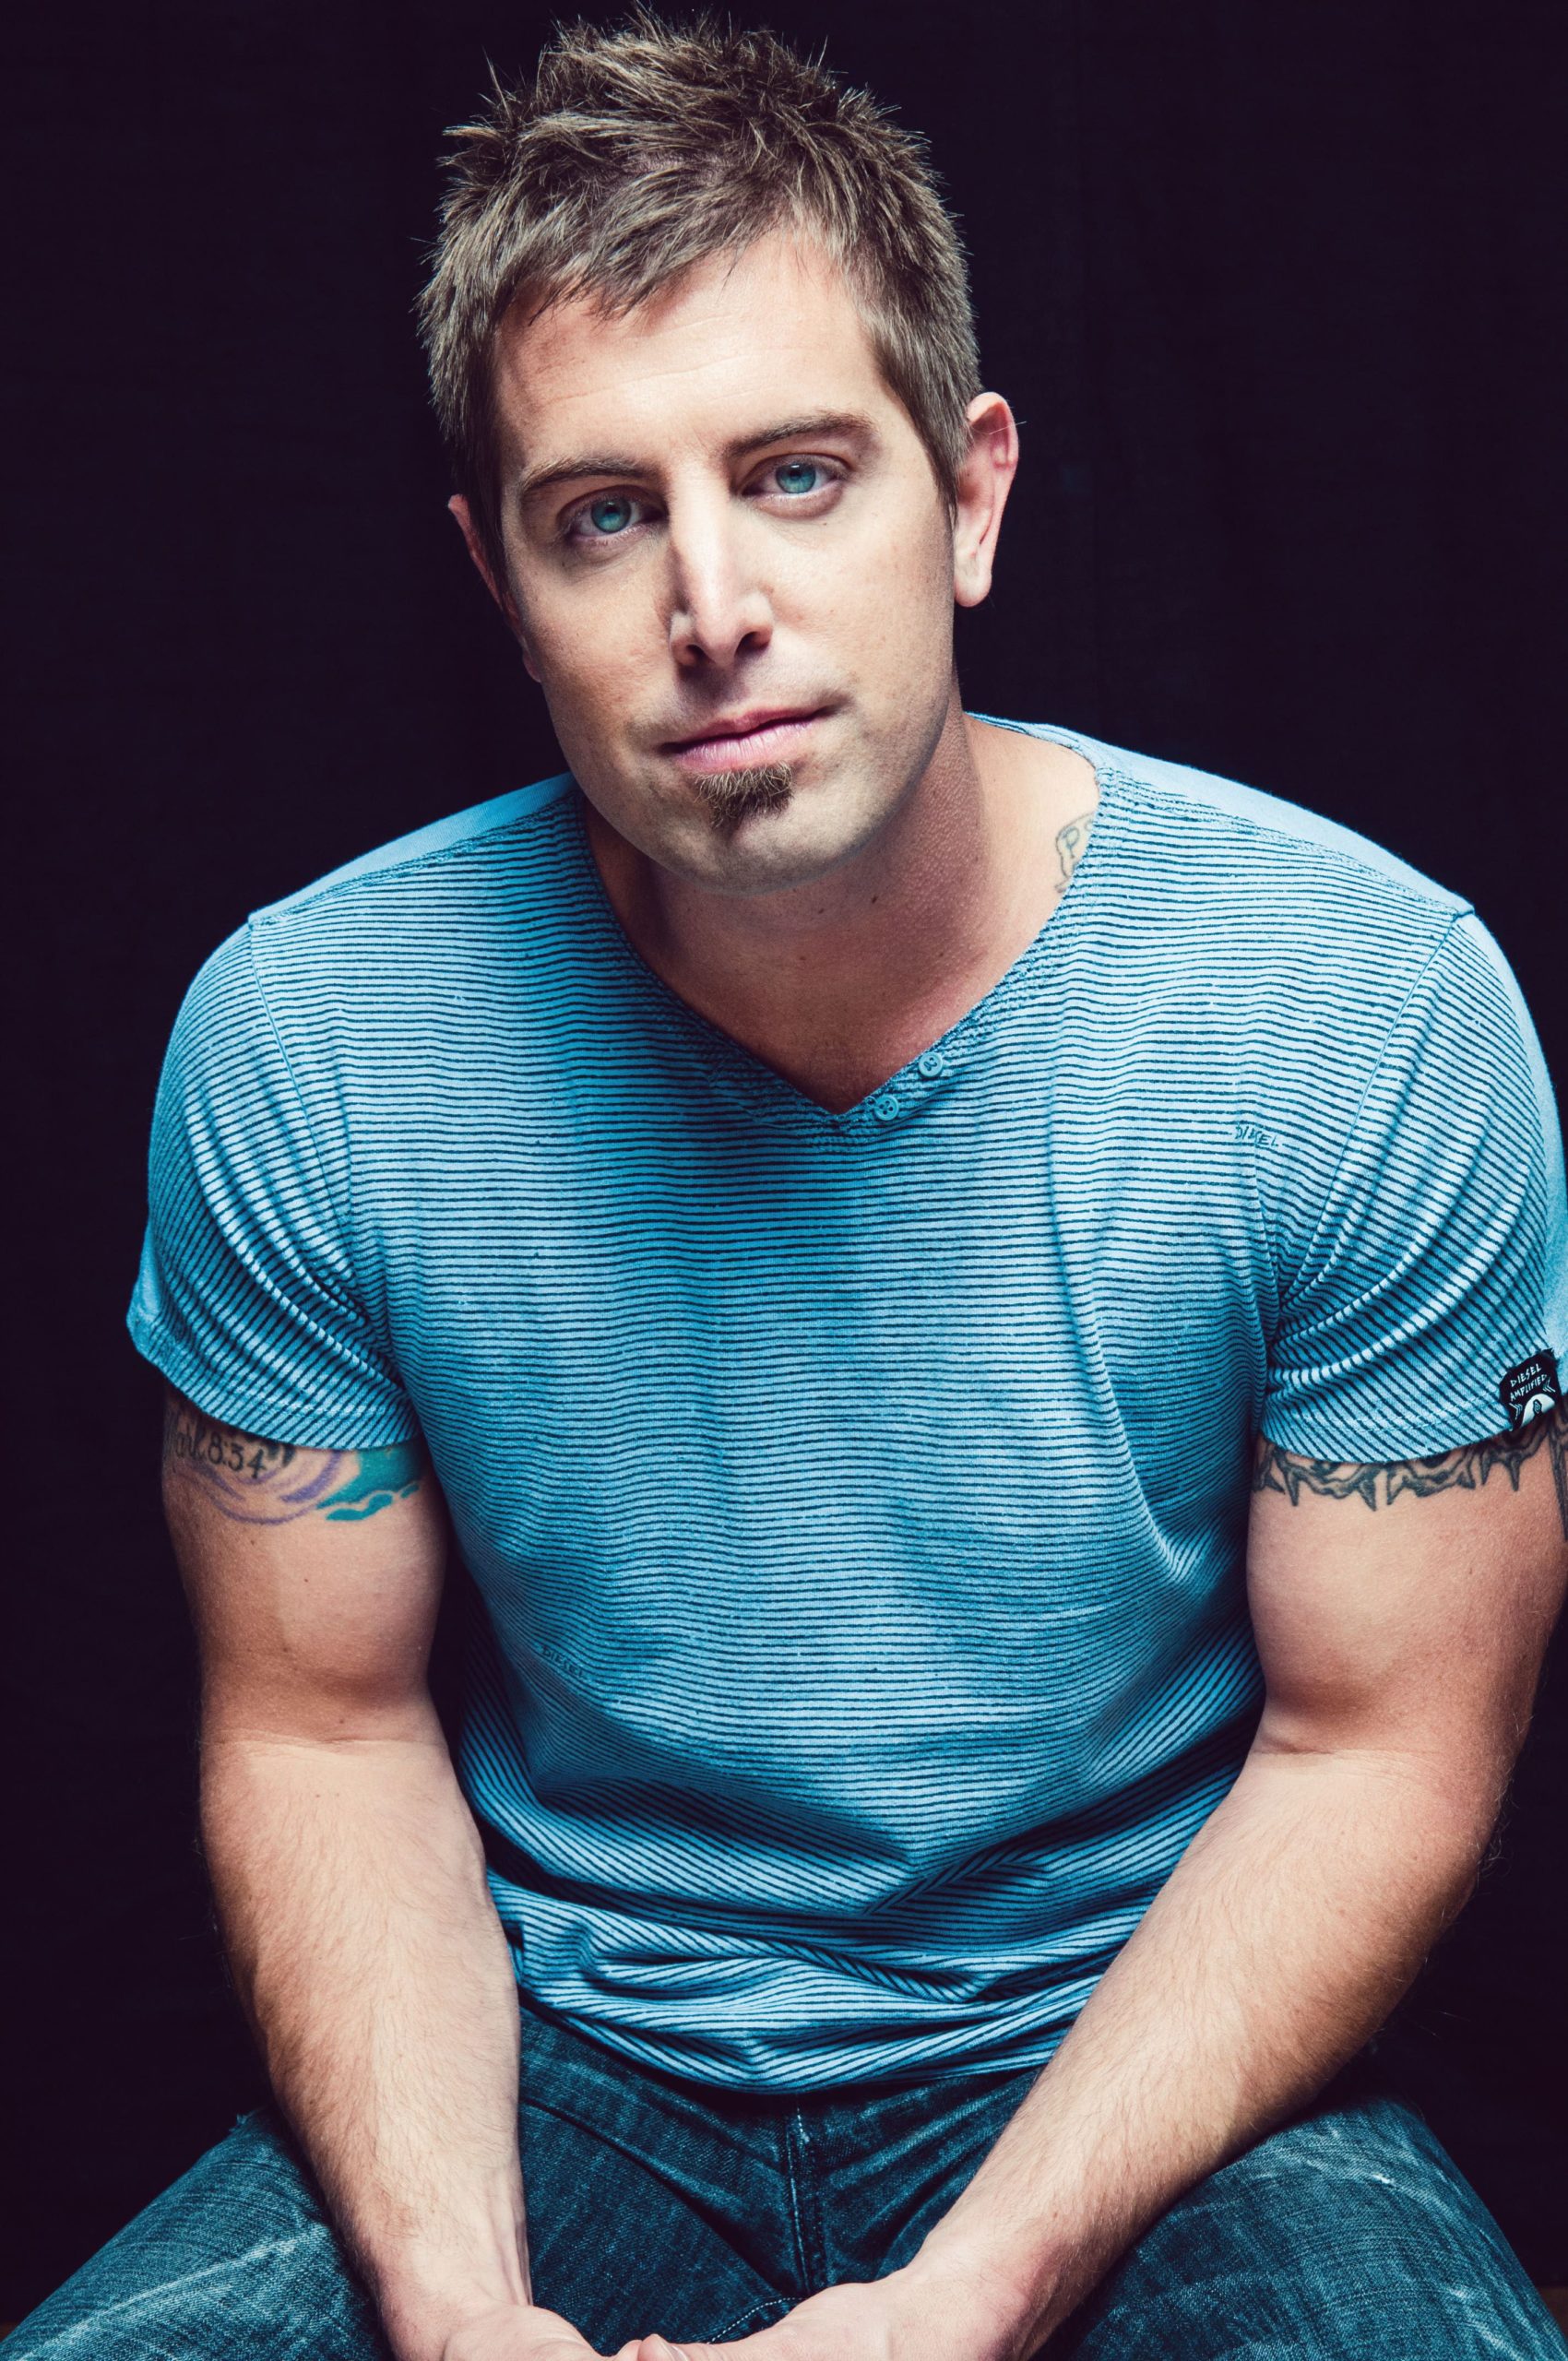 I Still Believe will follow the story behind Jeremy Camp’s Hit Sing